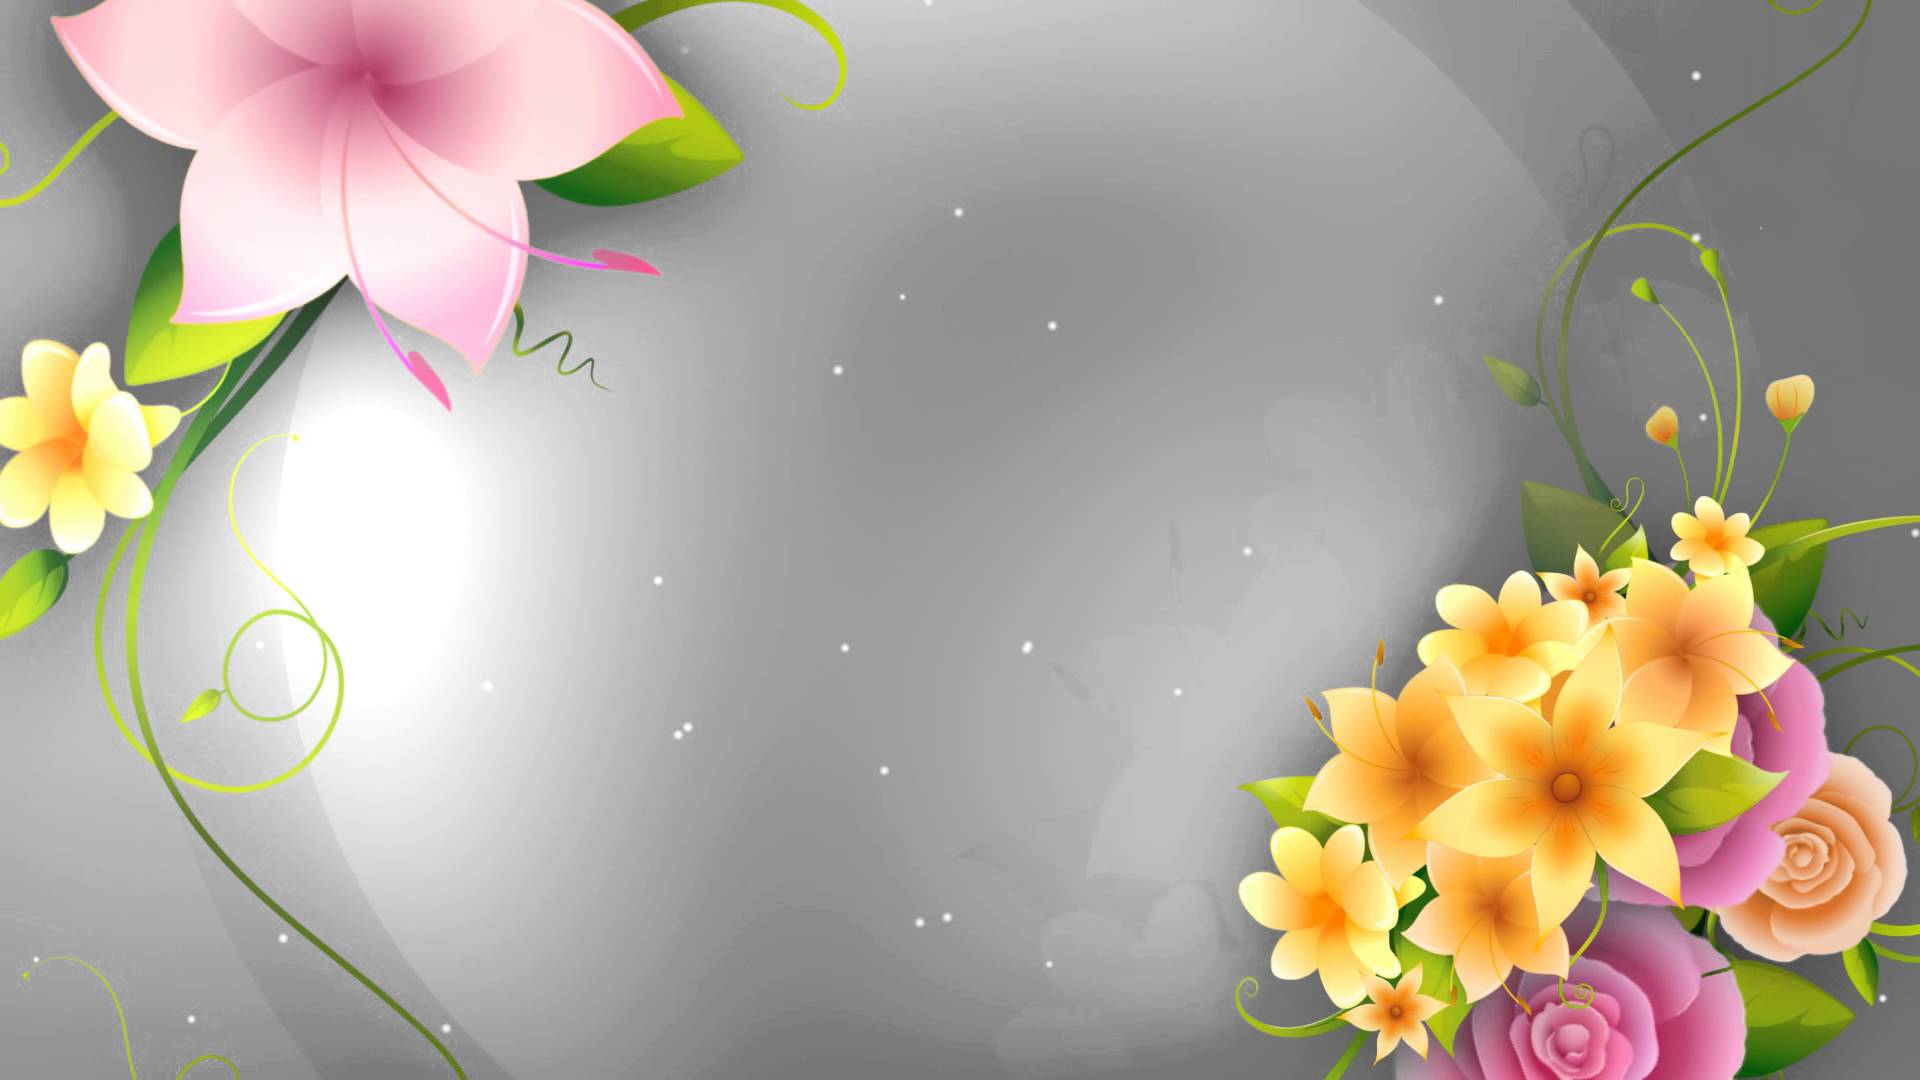 Floral Backgrounds HD - Wallpaper Cave